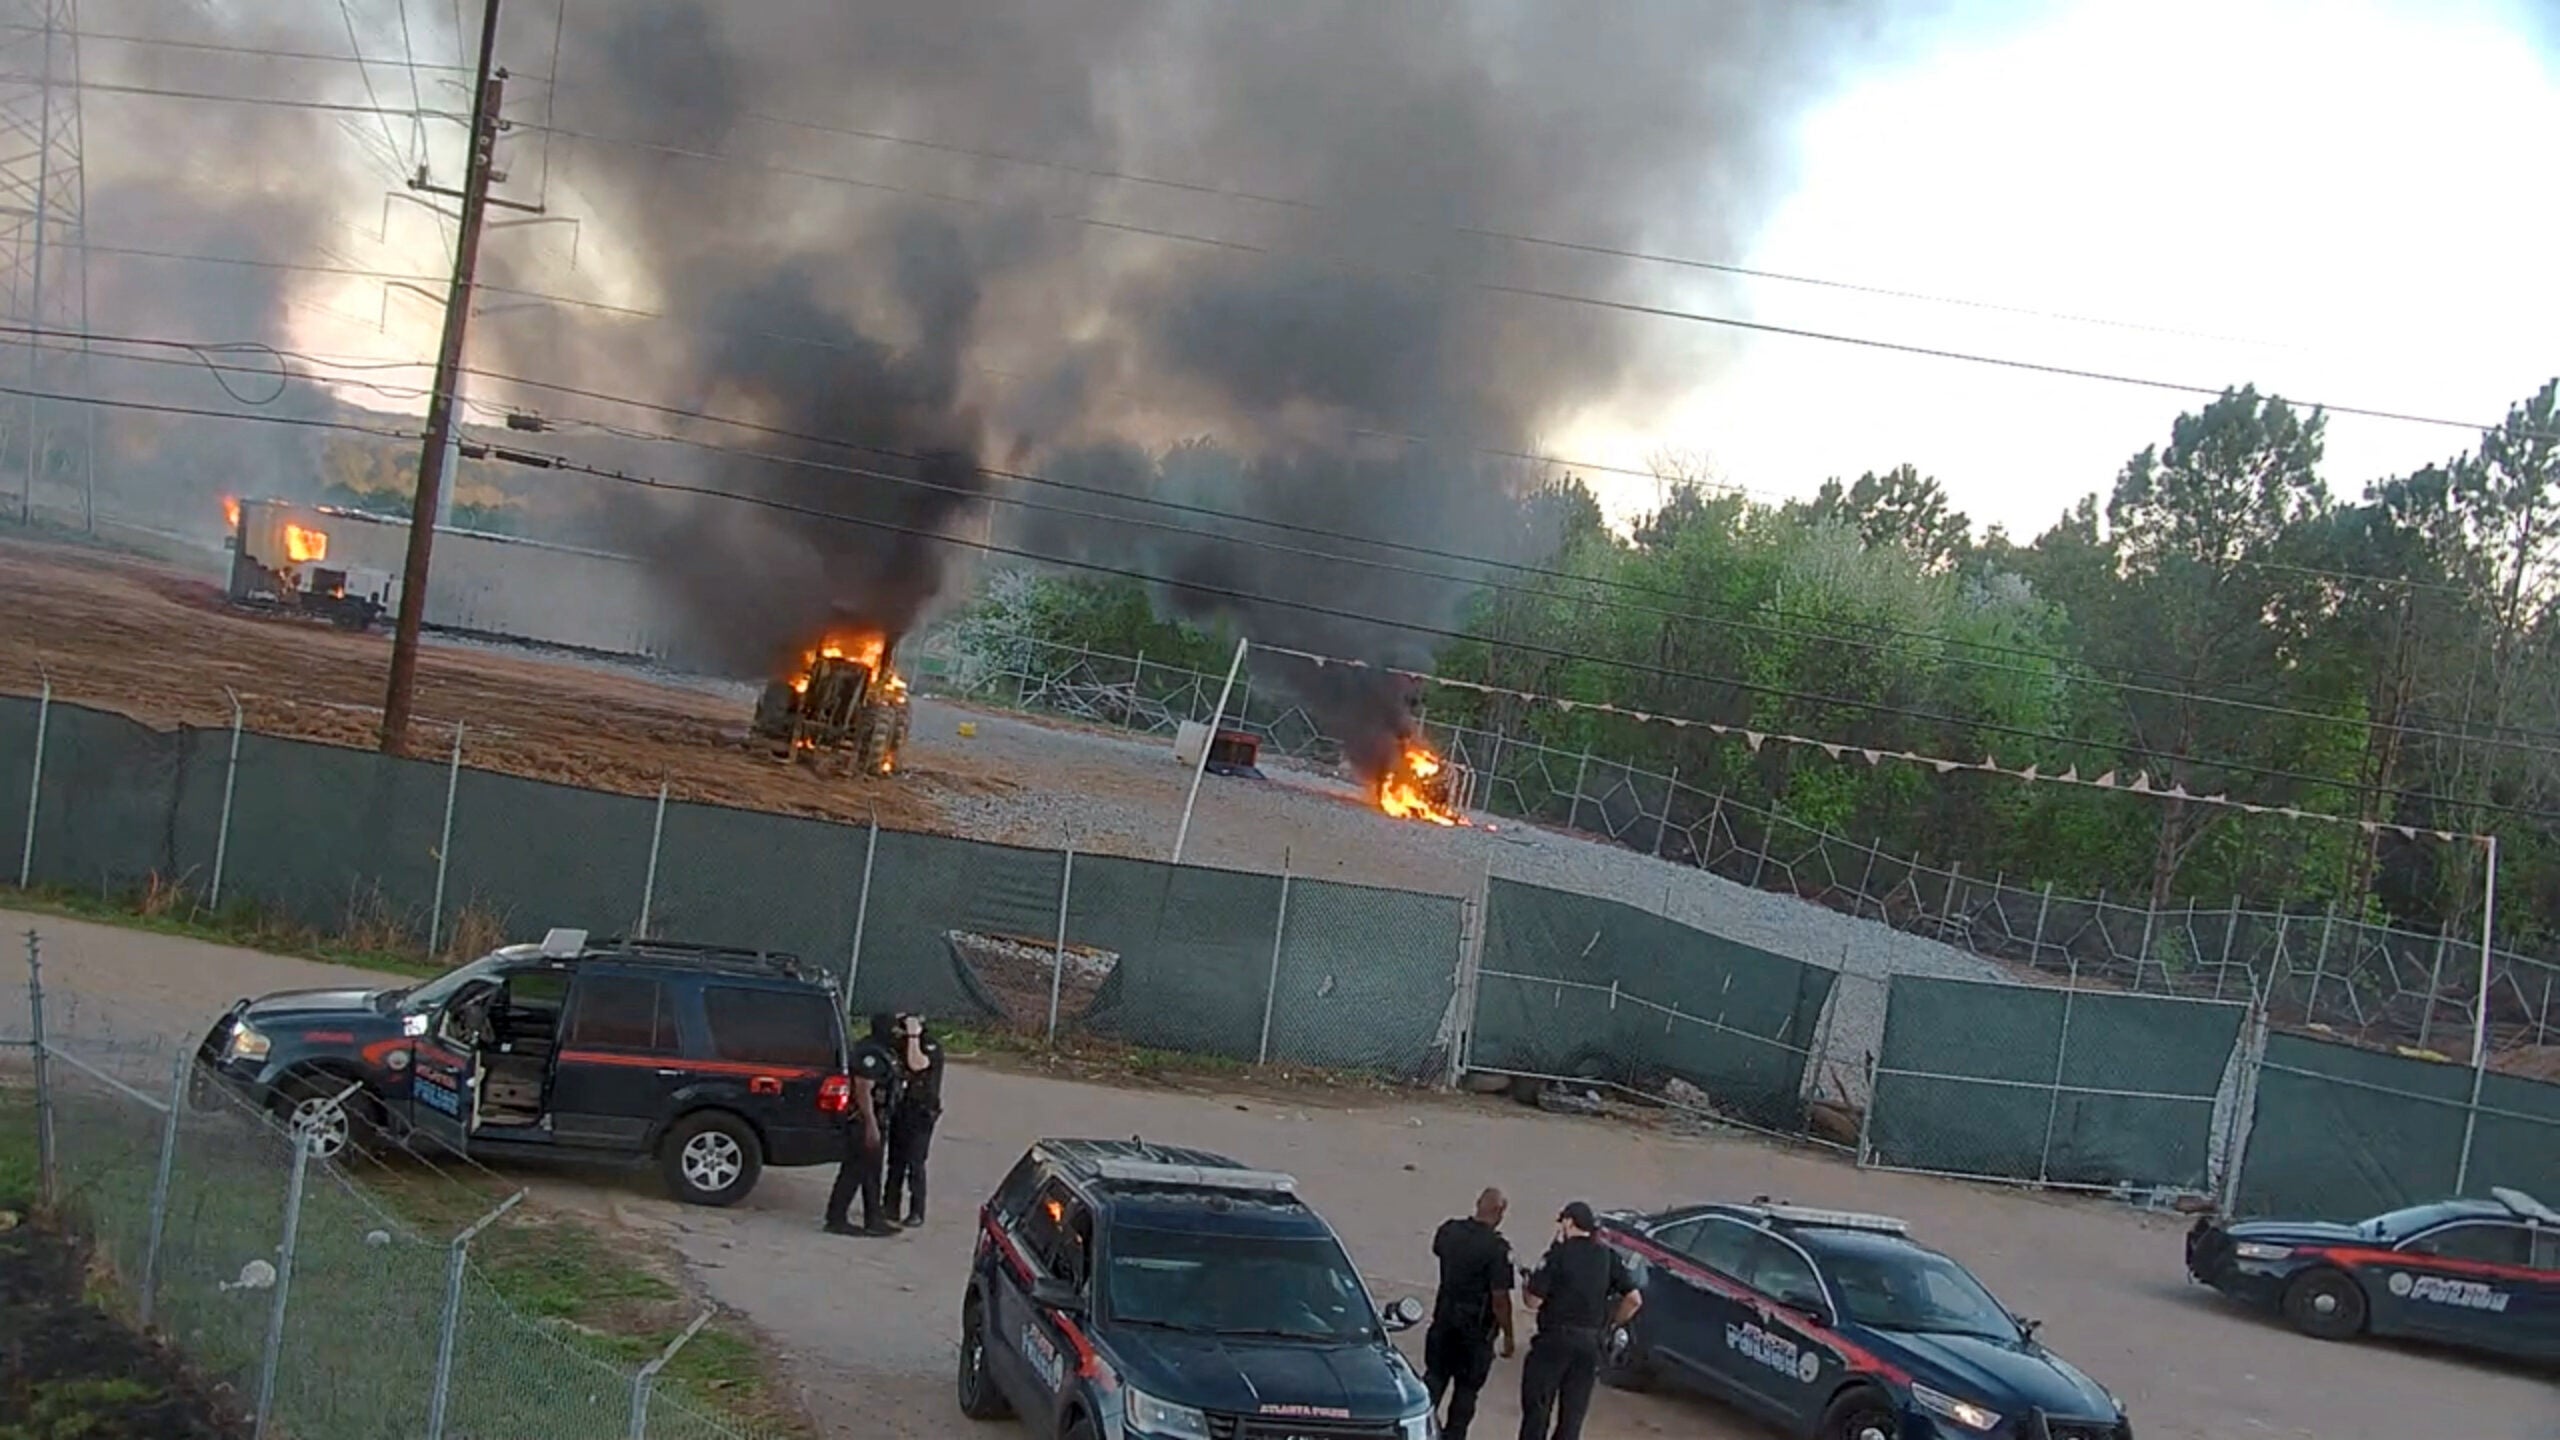 A photo provided by the Atlanta Police Department shows vehicles burning after hundreds of activists breached the site of a proposed police and fire training center in Atlanta's wooded outskirts on Sunday, March 5, 2023, burning police and construction vehicles and a trailer, and setting off fireworks toward officers stationed nearby.